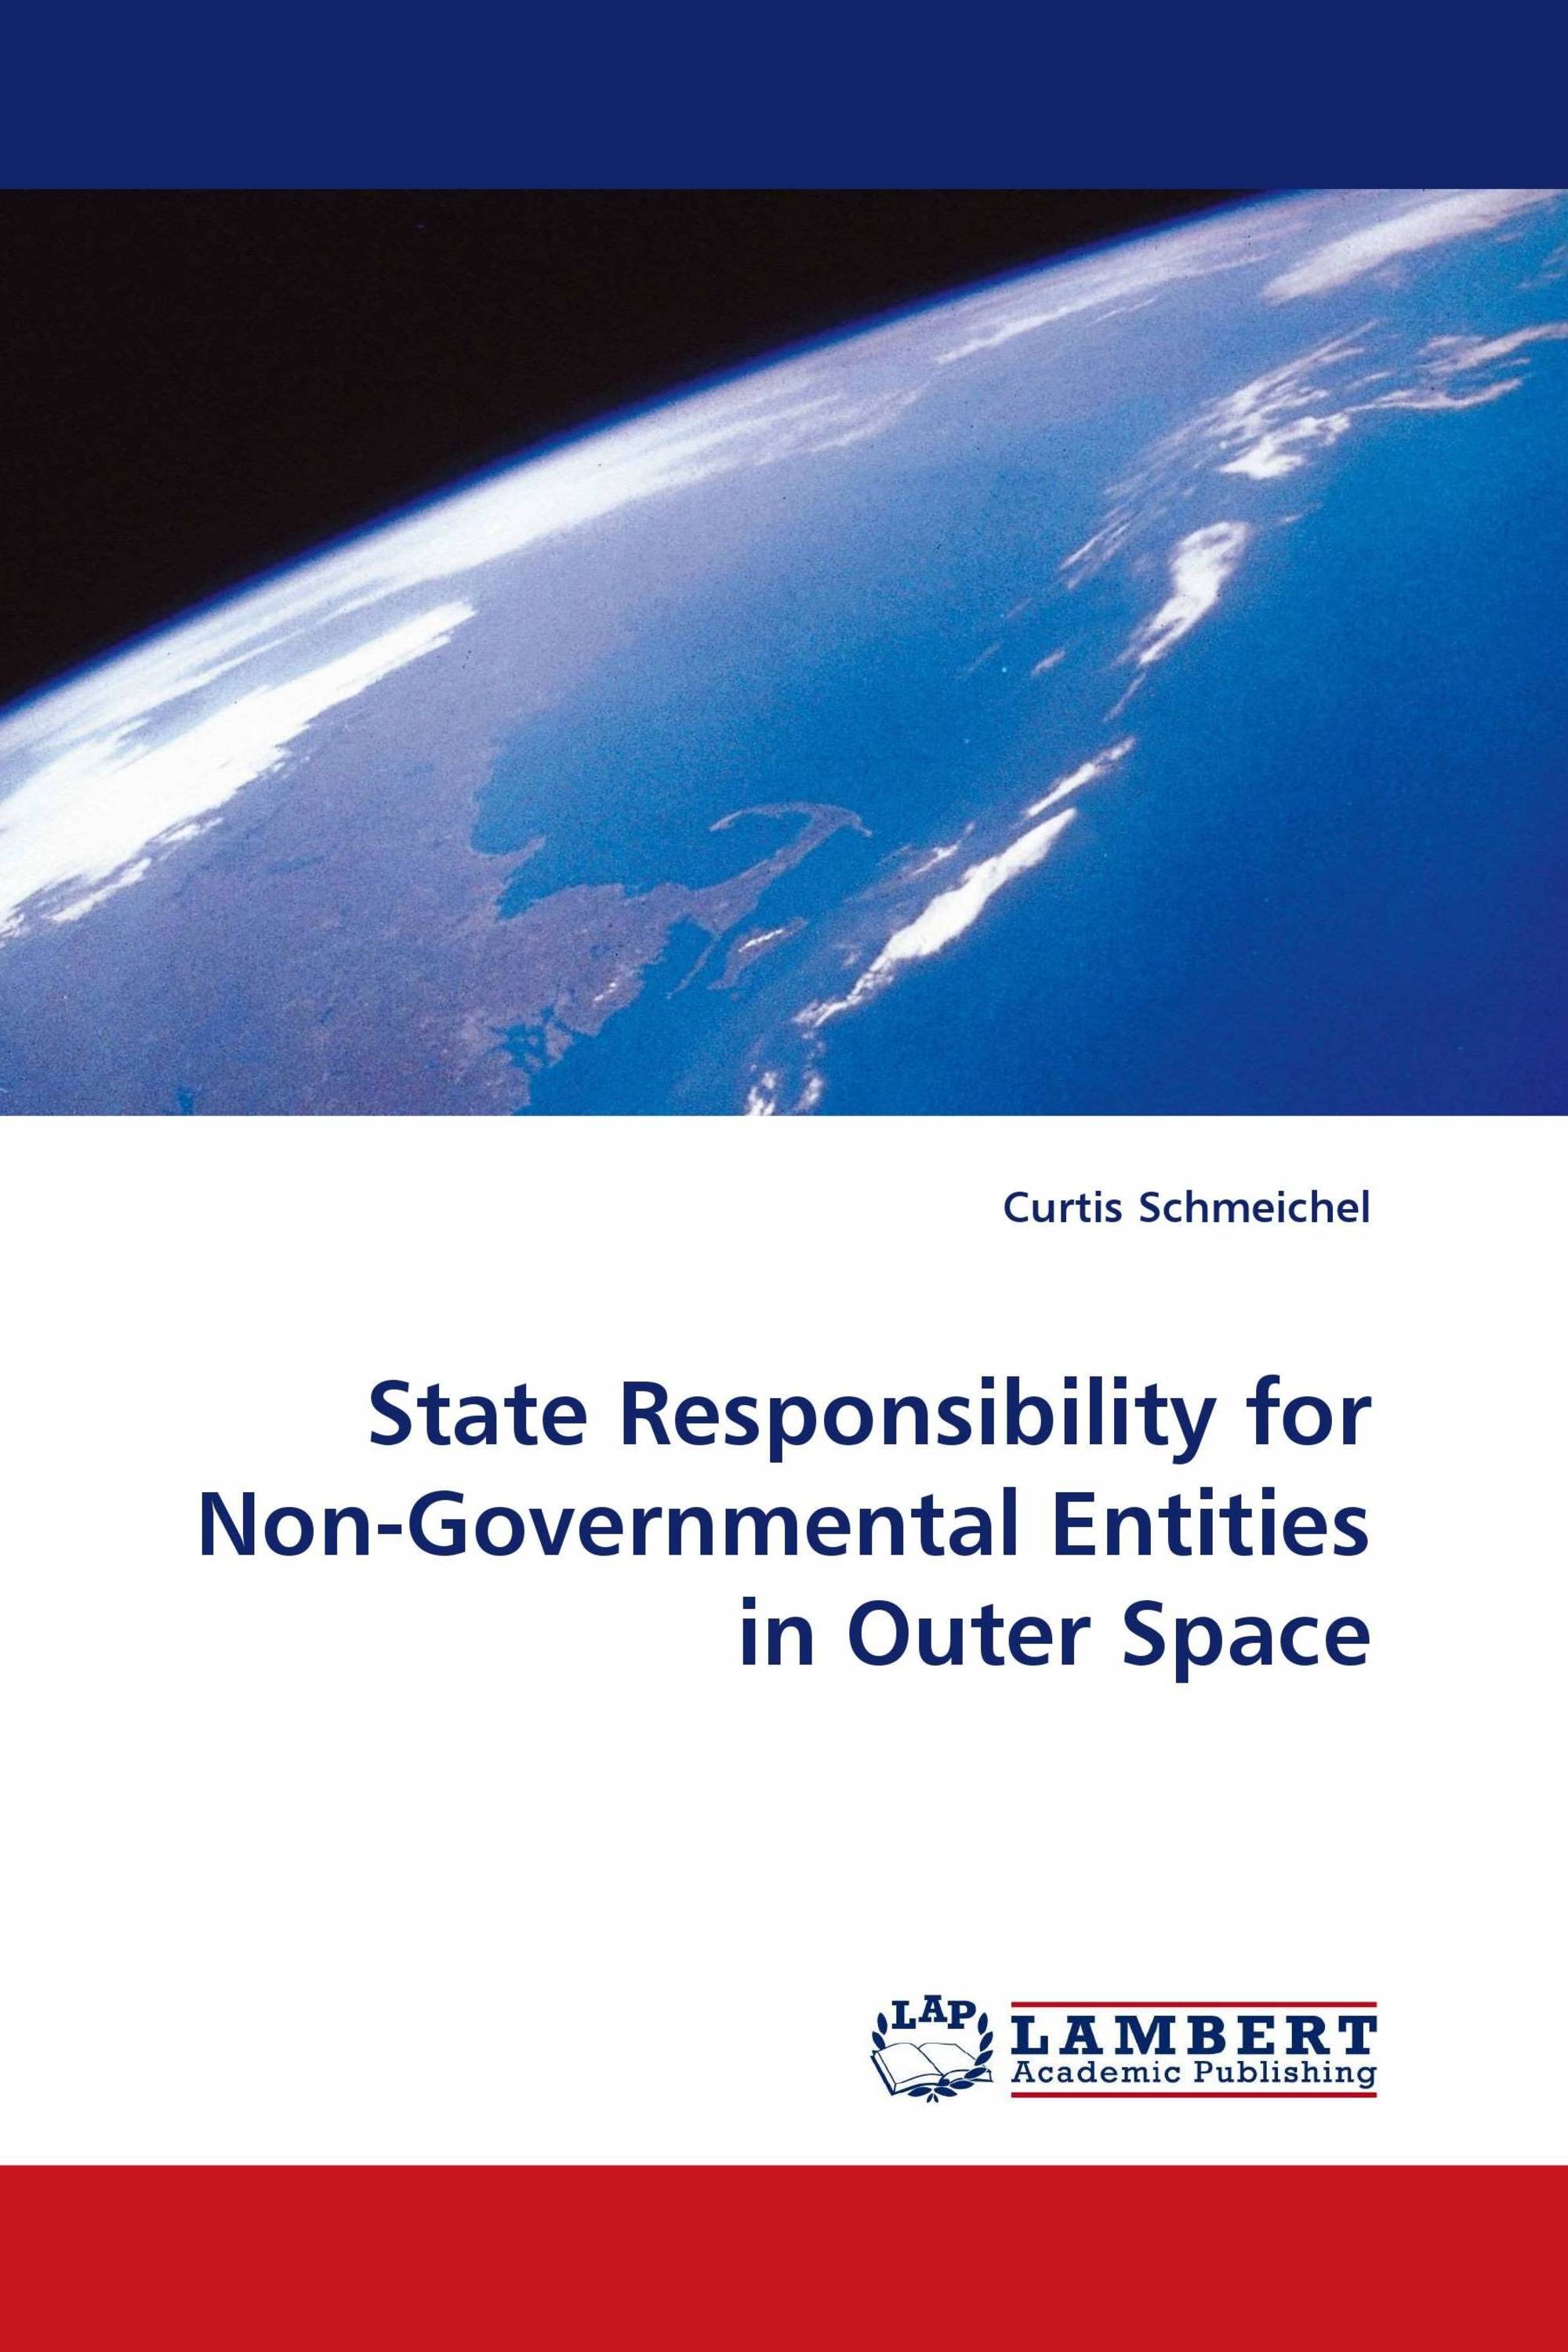 State Responsibility for Non-Governmental Entities in Outer Space